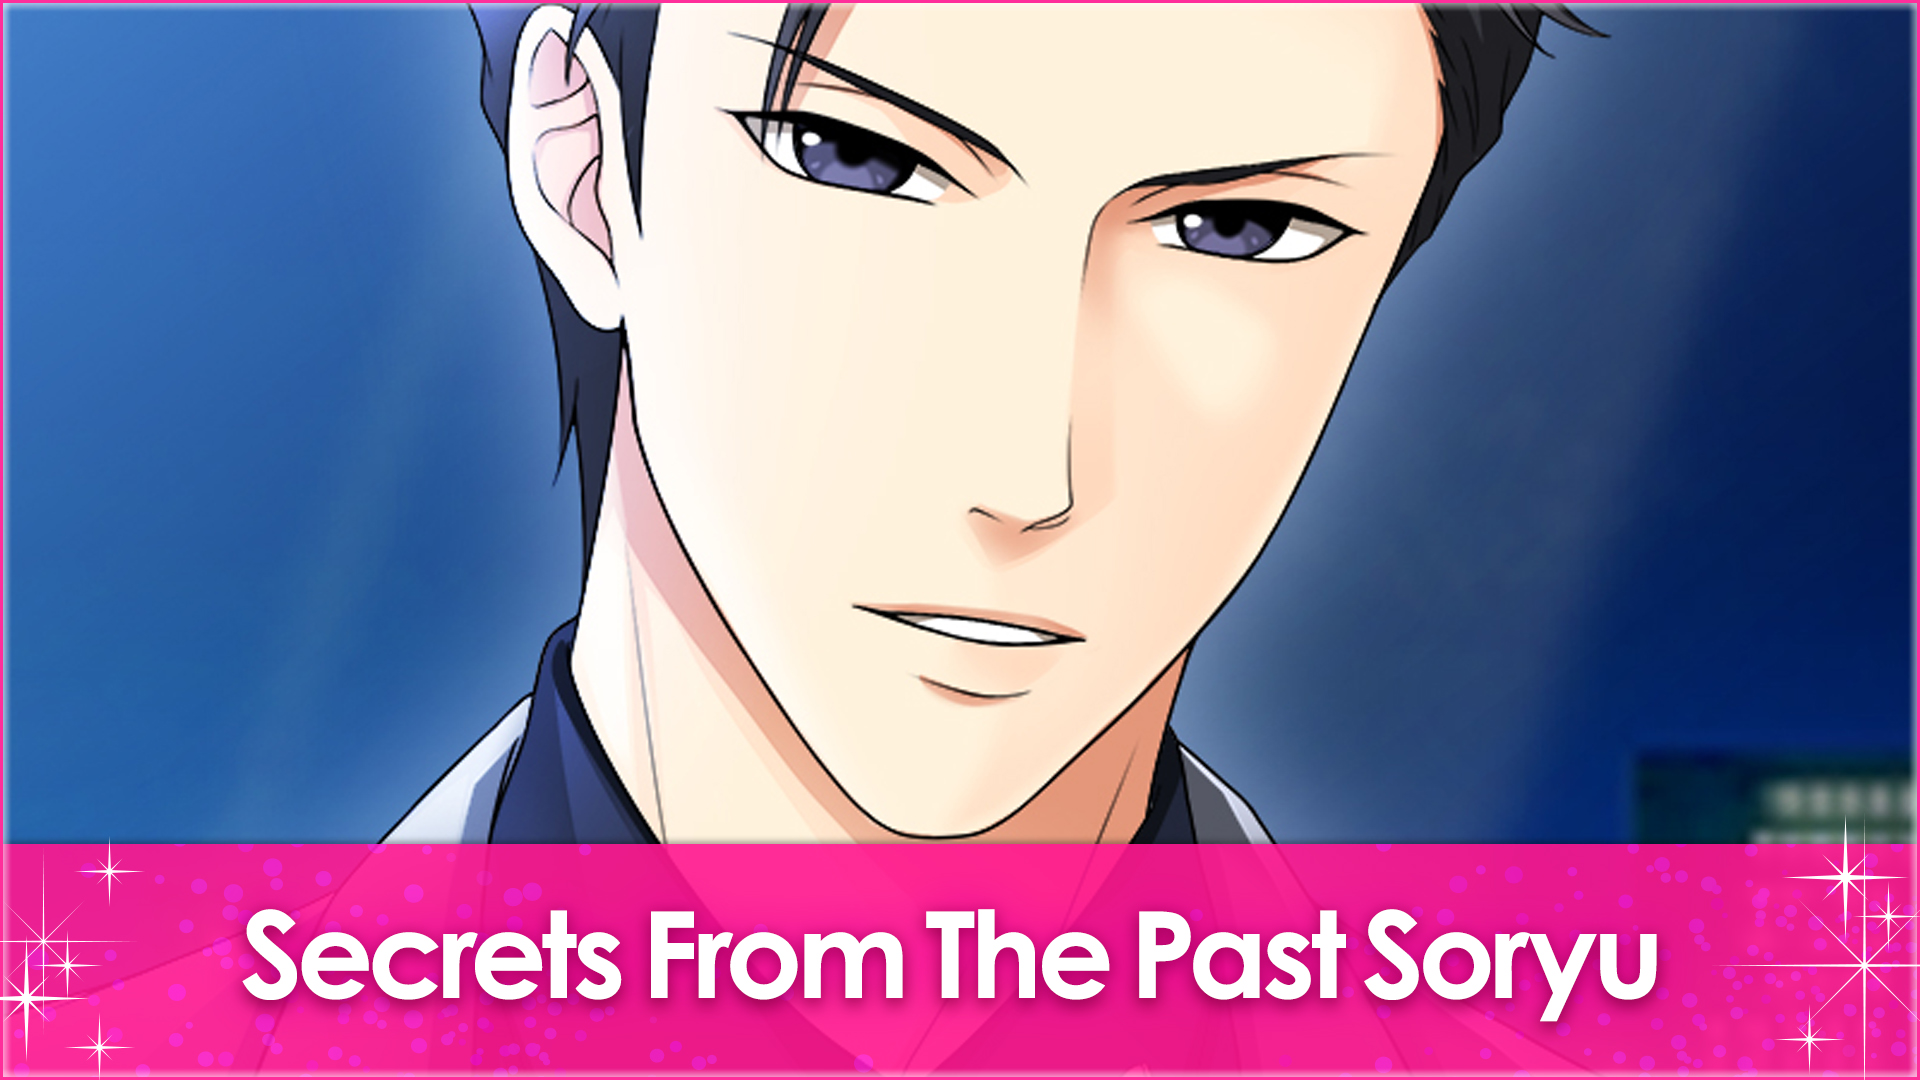 Secrets From The Past Soryu